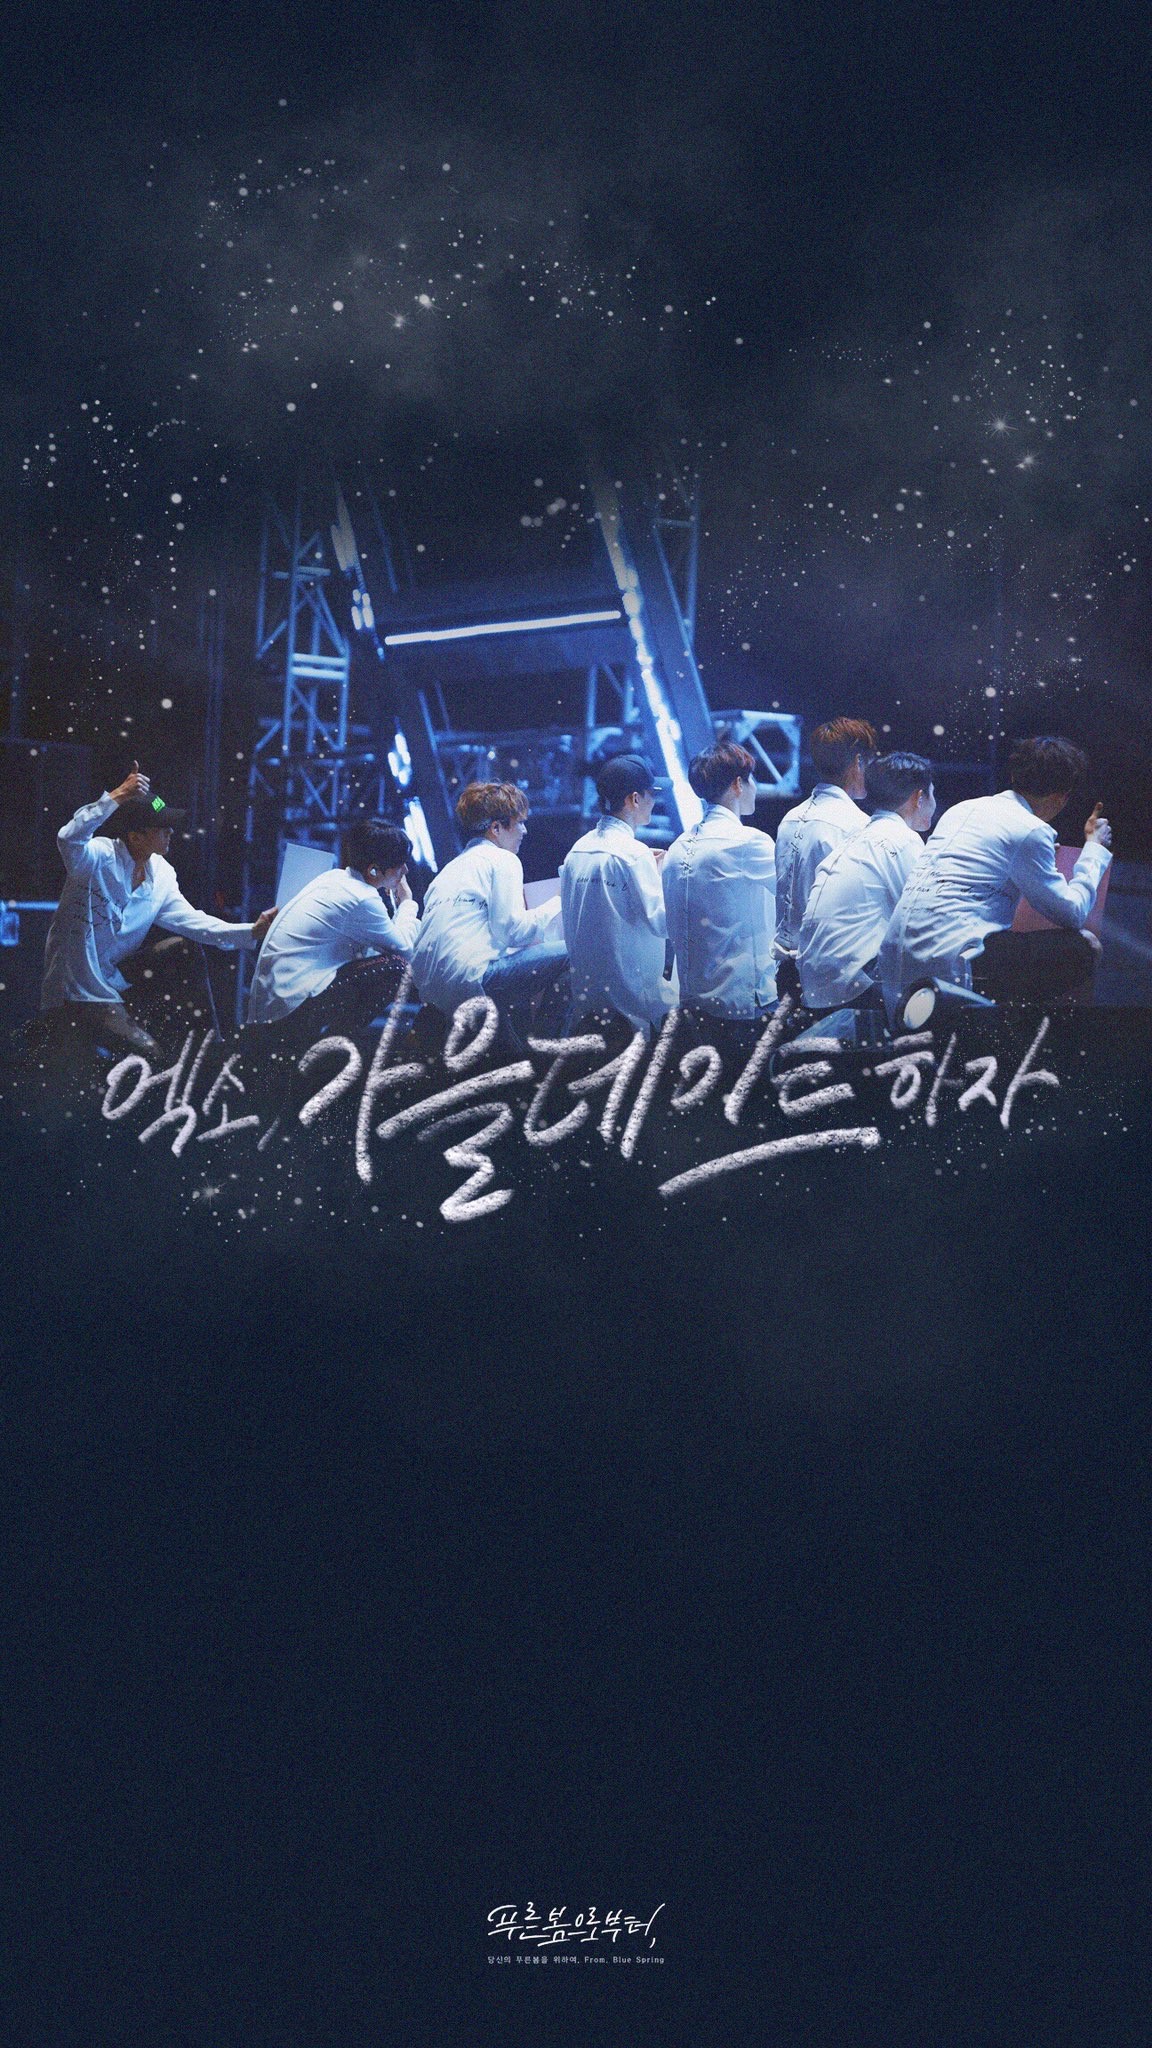 exo wallpaper,font,text,sky,graphic design,crowd